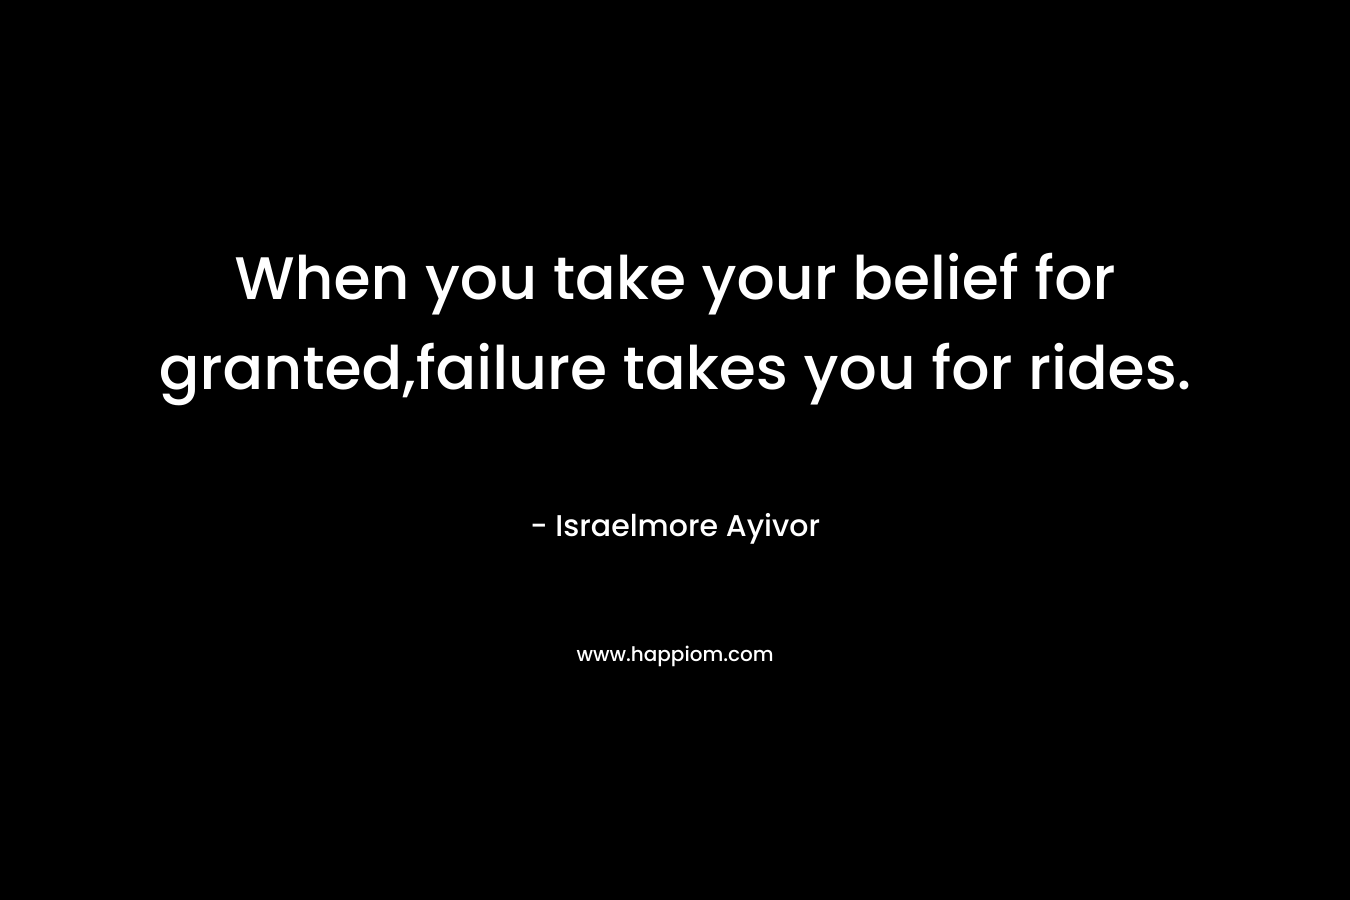 When you take your belief for granted,failure takes you for rides. – Israelmore Ayivor